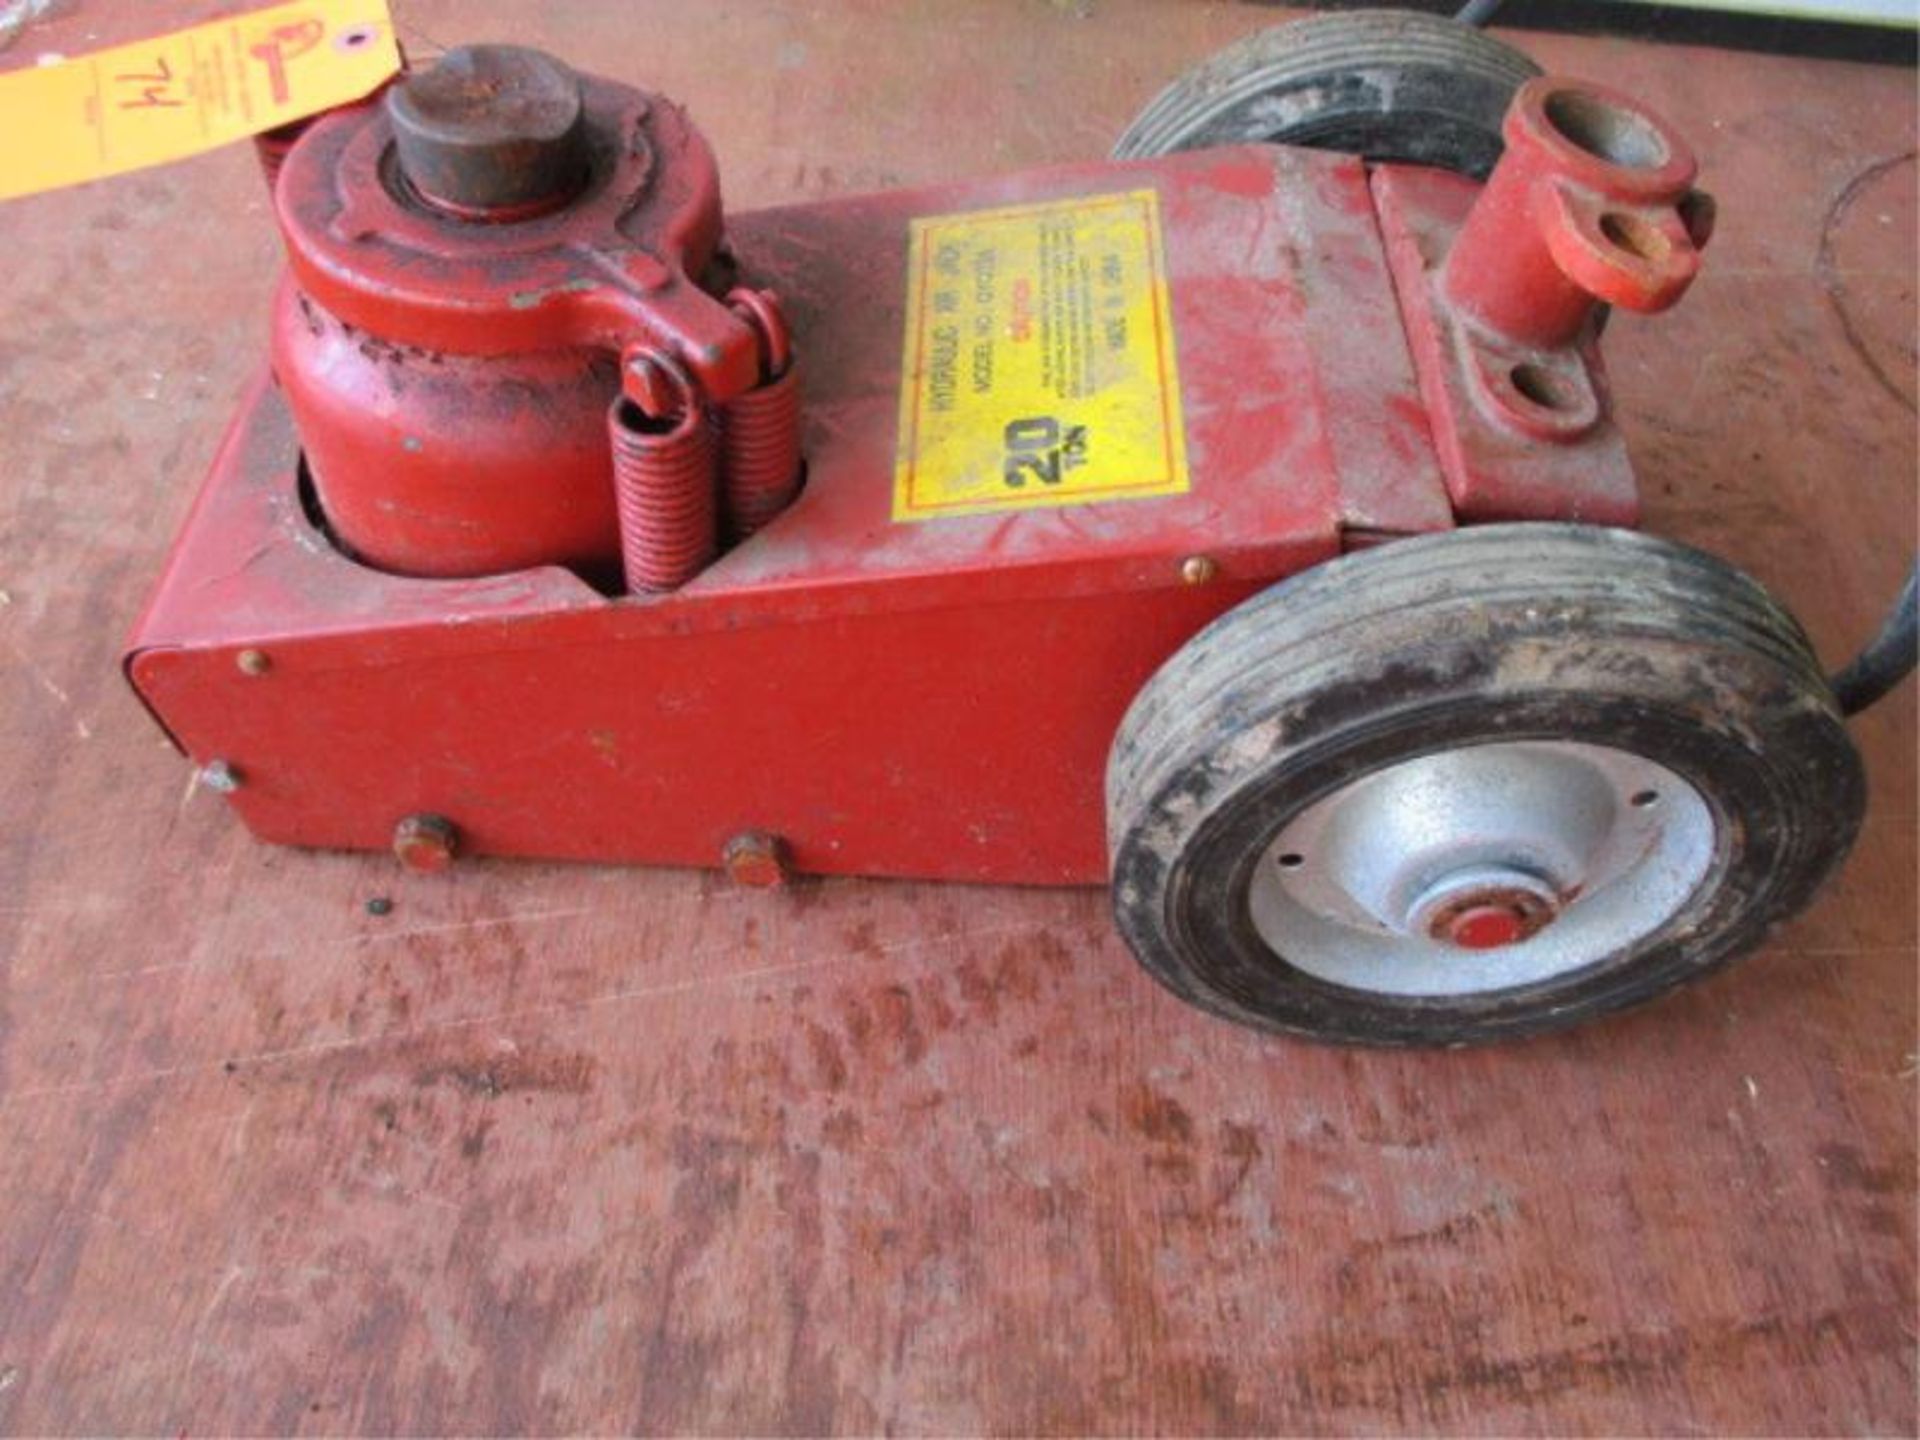 Hydraulic Air Jack, Model: QYQ20A, 20 Ton, Missing Handle Missing Handle - Image 9 of 13